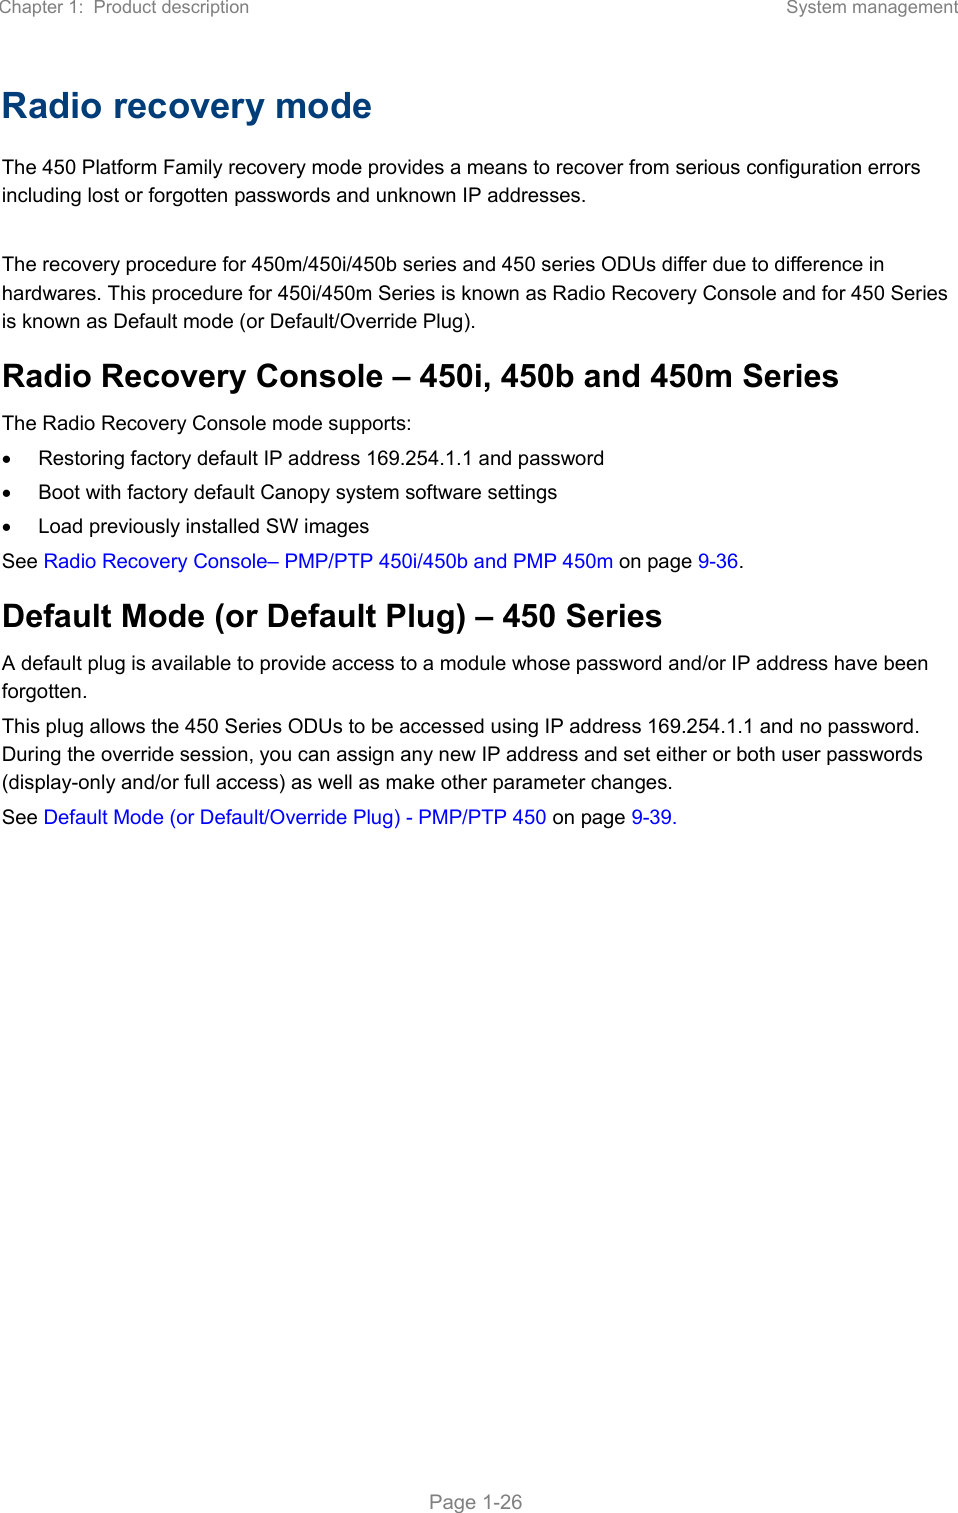 Chapter 1:  Product description  System management   Page 1-26 Radio recovery mode  The 450 Platform Family recovery mode provides a means to recover from serious configuration errors including lost or forgotten passwords and unknown IP addresses.  The recovery procedure for 450m/450i/450b series and 450 series ODUs differ due to difference in hardwares. This procedure for 450i/450m Series is known as Radio Recovery Console and for 450 Series is known as Default mode (or Default/Override Plug).  Radio Recovery Console – 450i, 450b and 450m Series  The Radio Recovery Console mode supports:   Restoring factory default IP address 169.254.1.1 and password   Boot with factory default Canopy system software settings   Load previously installed SW images See Radio Recovery Console– PMP/PTP 450i/450b and PMP 450m on page 9-36. Default Mode (or Default Plug) – 450 Series  A default plug is available to provide access to a module whose password and/or IP address have been forgotten.  This plug allows the 450 Series ODUs to be accessed using IP address 169.254.1.1 and no password. During the override session, you can assign any new IP address and set either or both user passwords (display-only and/or full access) as well as make other parameter changes. See Default Mode (or Default/Override Plug) - PMP/PTP 450 on page 9-39.   